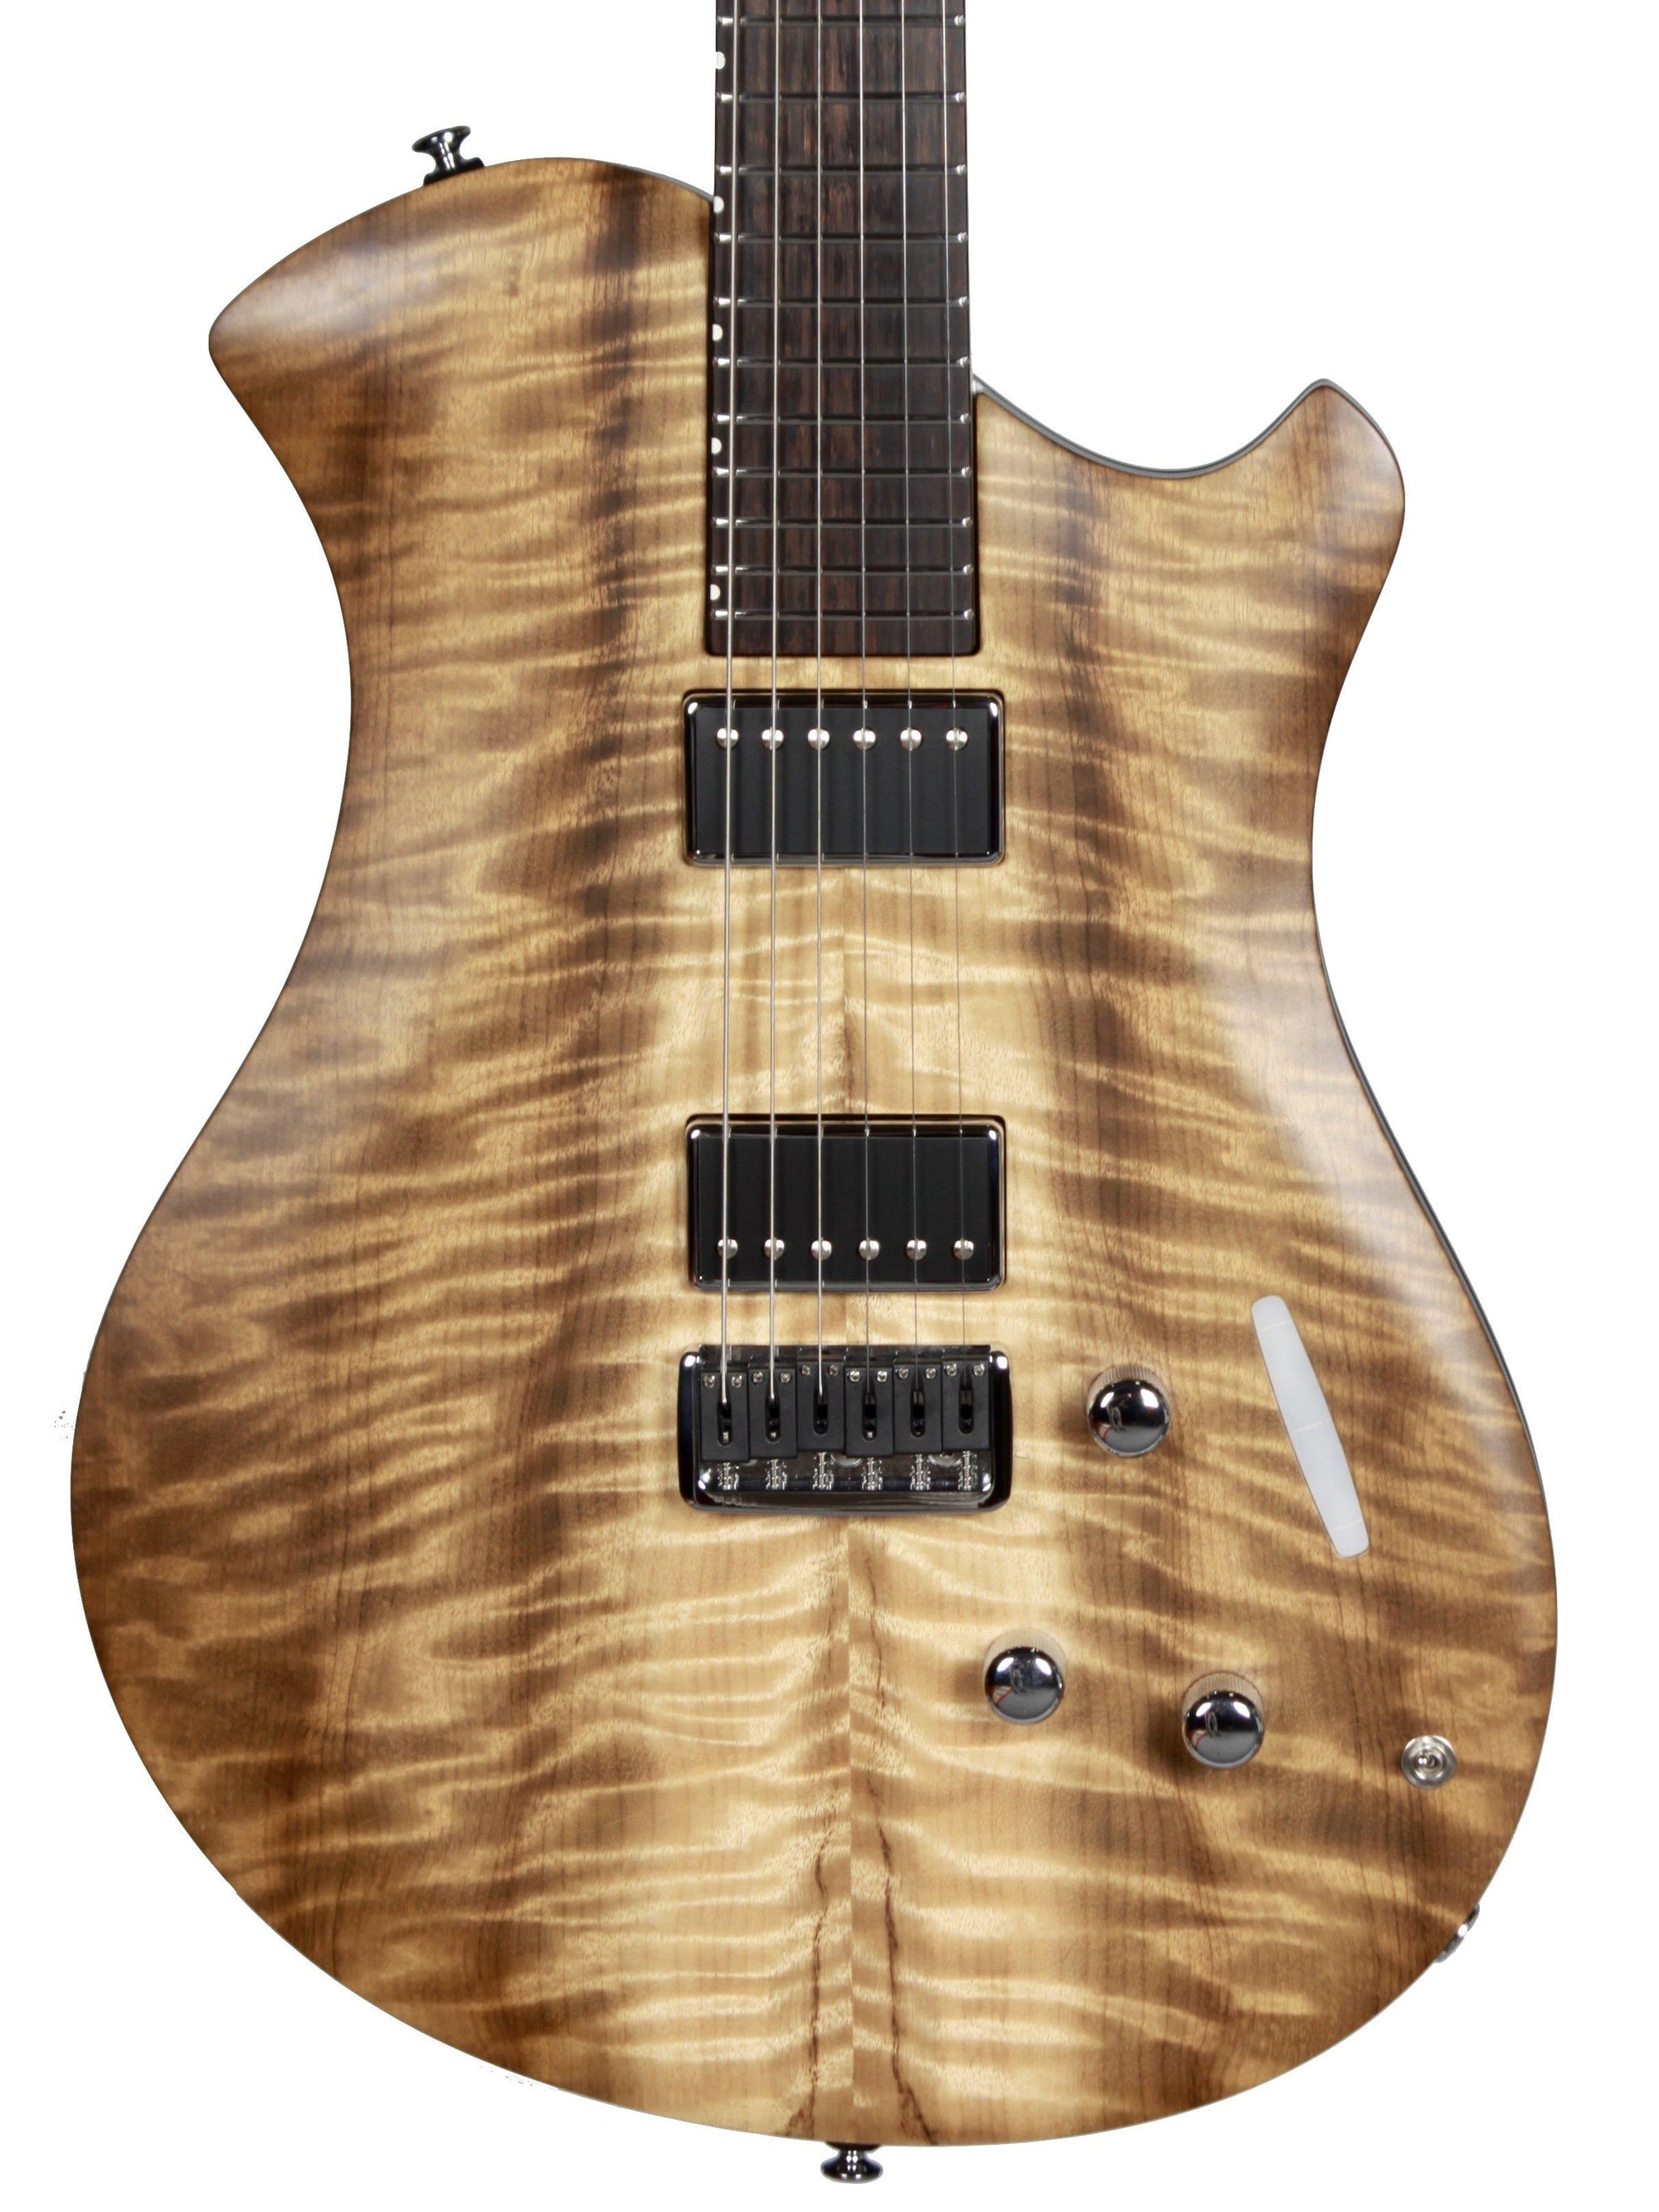 Relish Mary Eucalypt with Pick Up Swapping and Piezo Serial #190155 - Relish Guitars - Heartbreaker Guitars